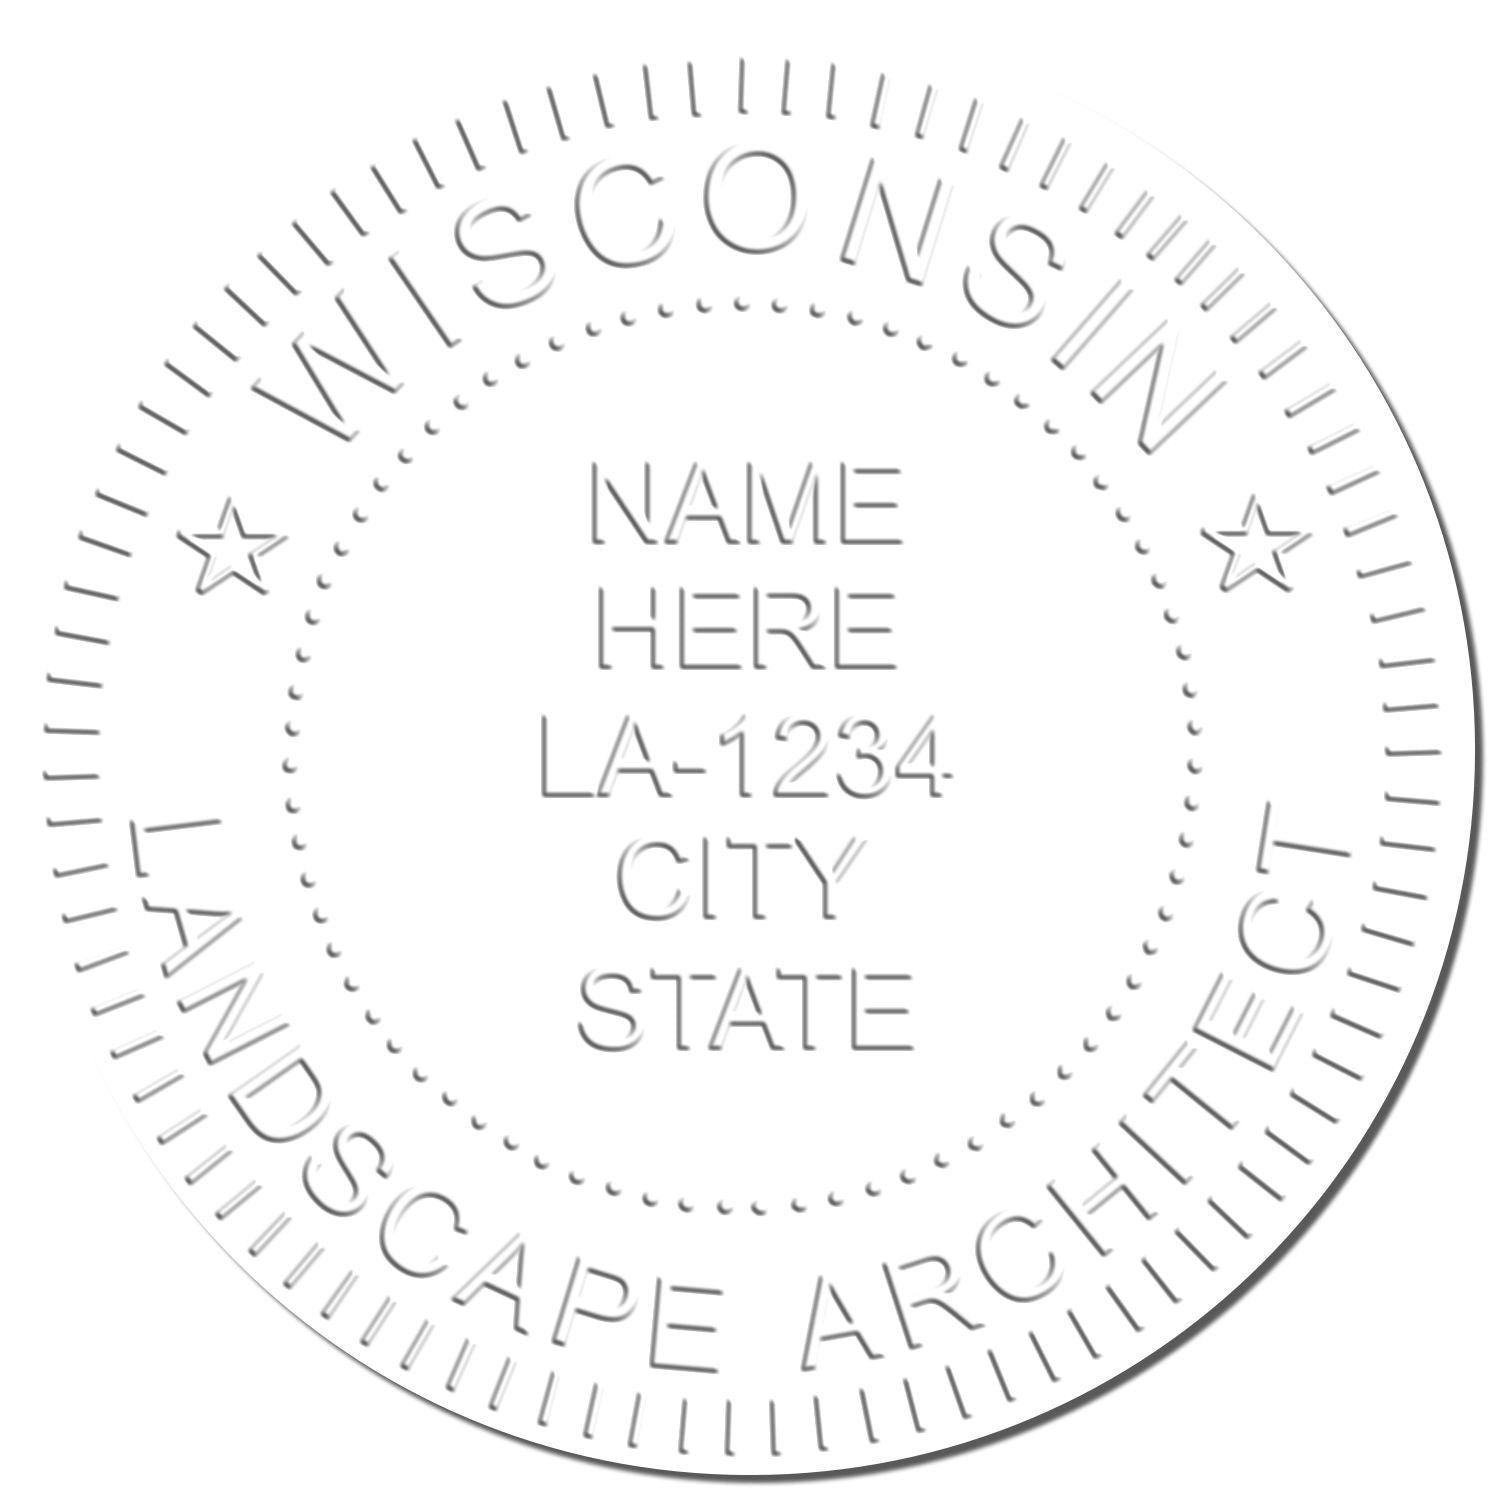 This paper is stamped with a sample imprint of the Gift Wisconsin Landscape Architect Seal, signifying its quality and reliability.